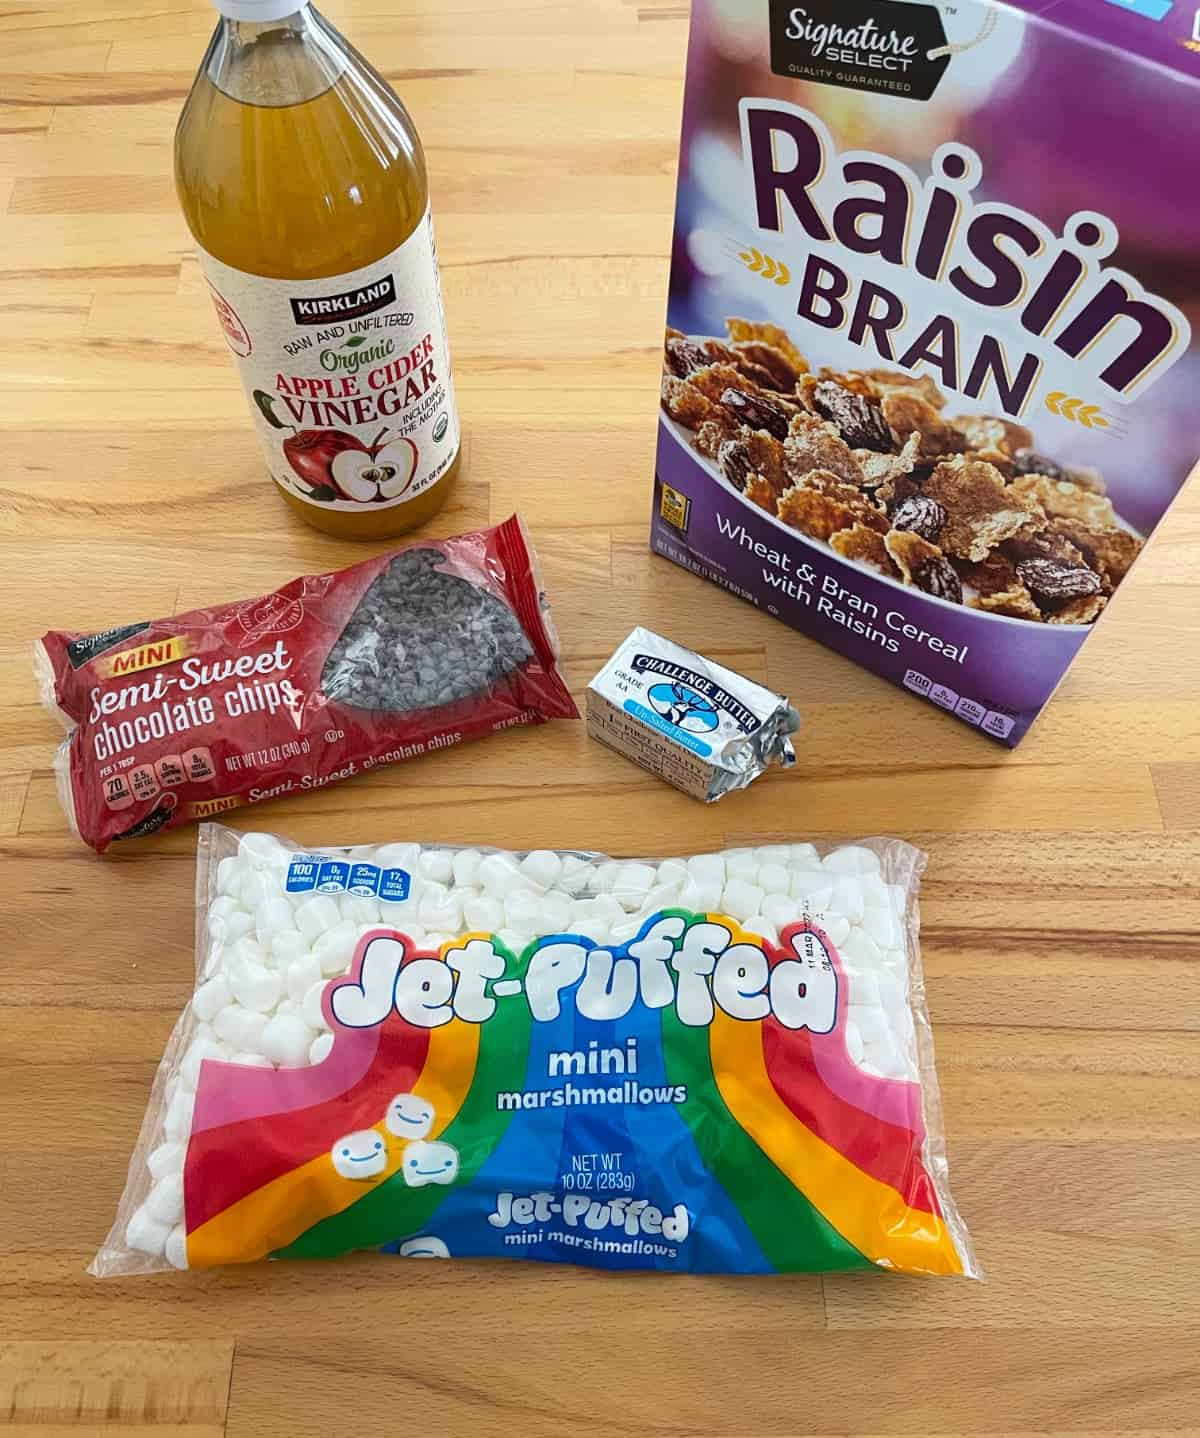 Ingredients for making cereal bars, including Raisin Bran cereal, mini marshmallows, mini chocolate chips, butter and apple cider vinegar.